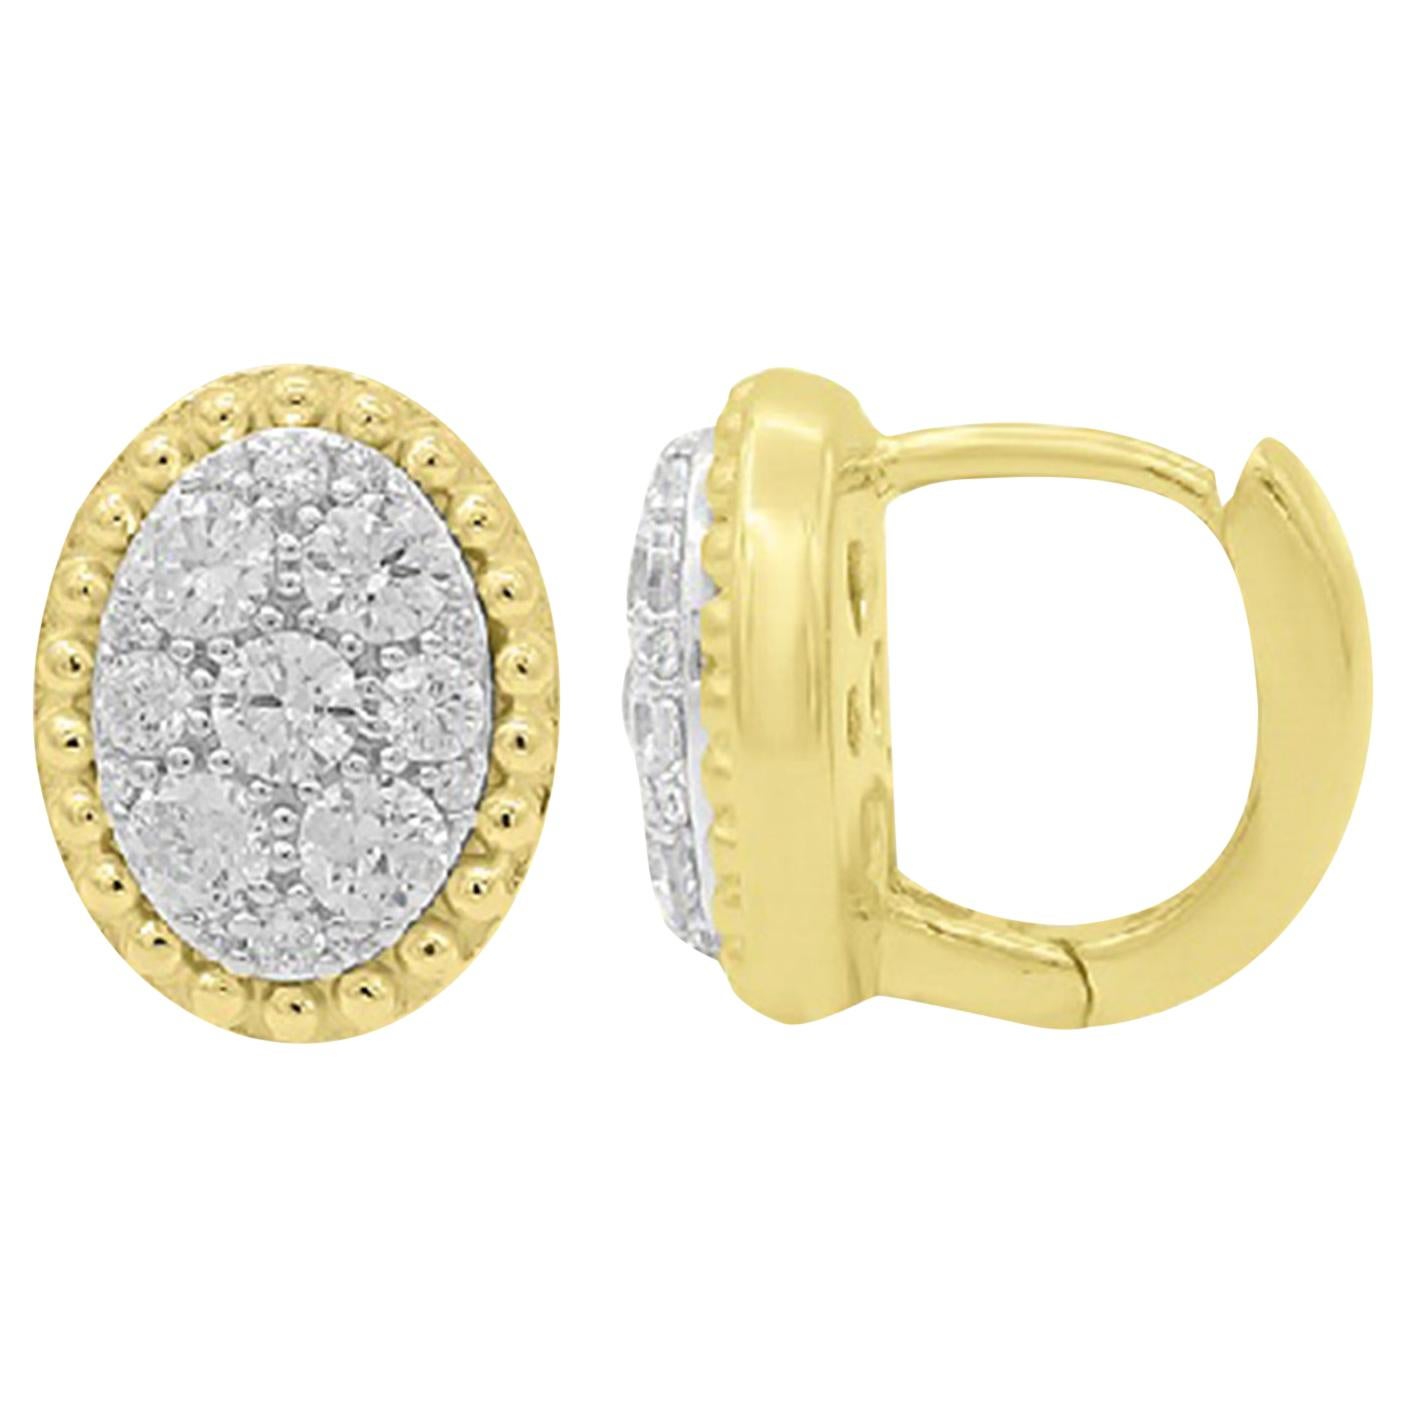 TJD 0.50 Carat Round Diamond 14K Yellow Gold Oval Shaped Cluster Stud Earrings For Sale